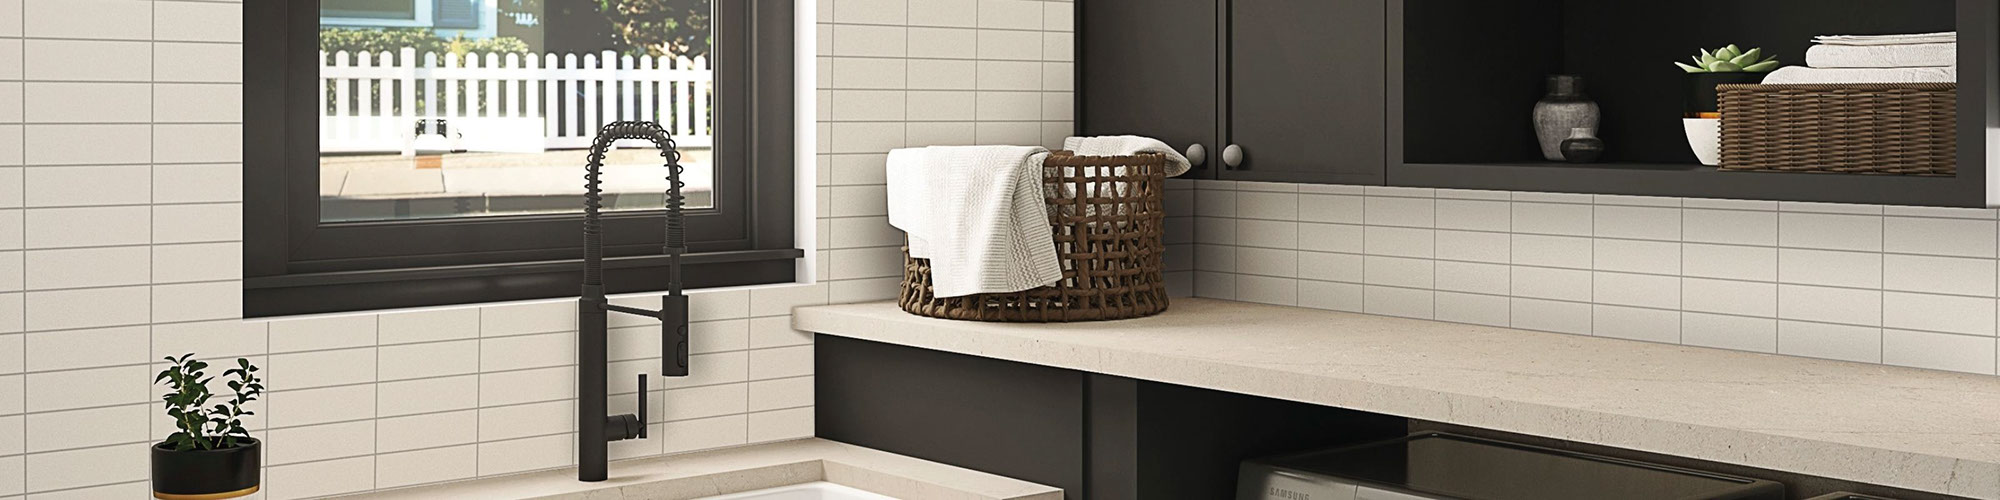 Laundry room with sink, black matte faucet, off-white quartz counters, off-white subway wall tile in grid pattern, and open brown cabinets.